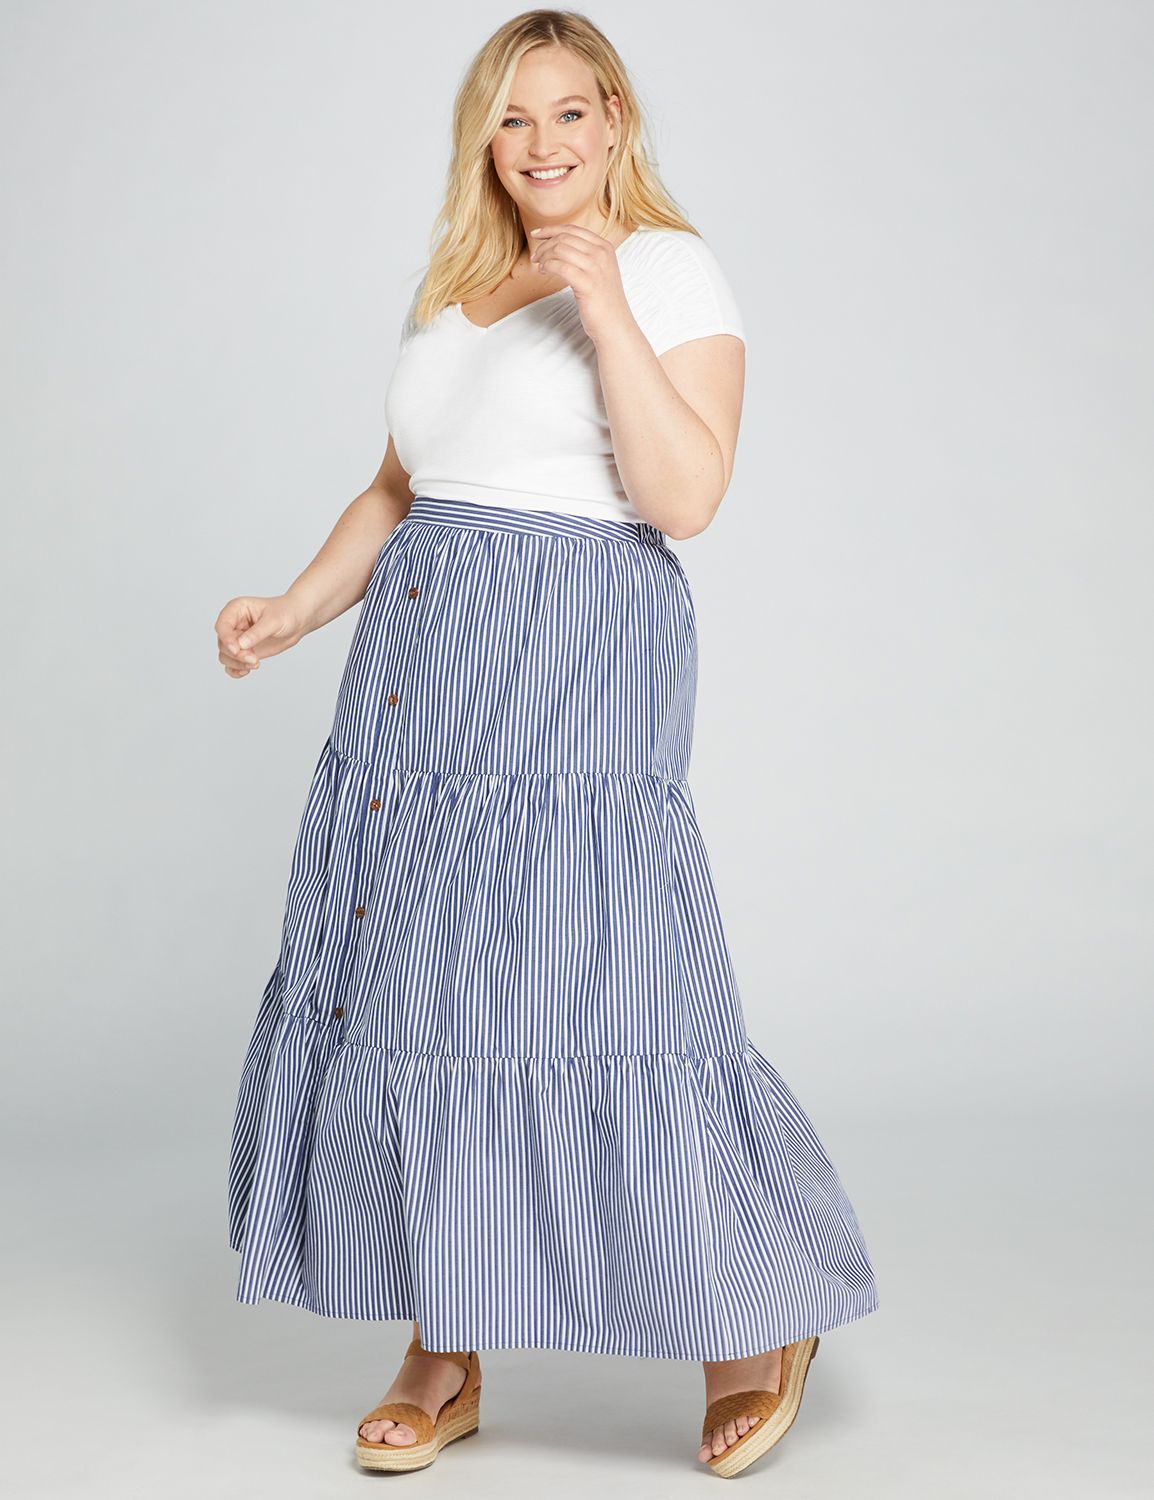 plus size long skirt outfits